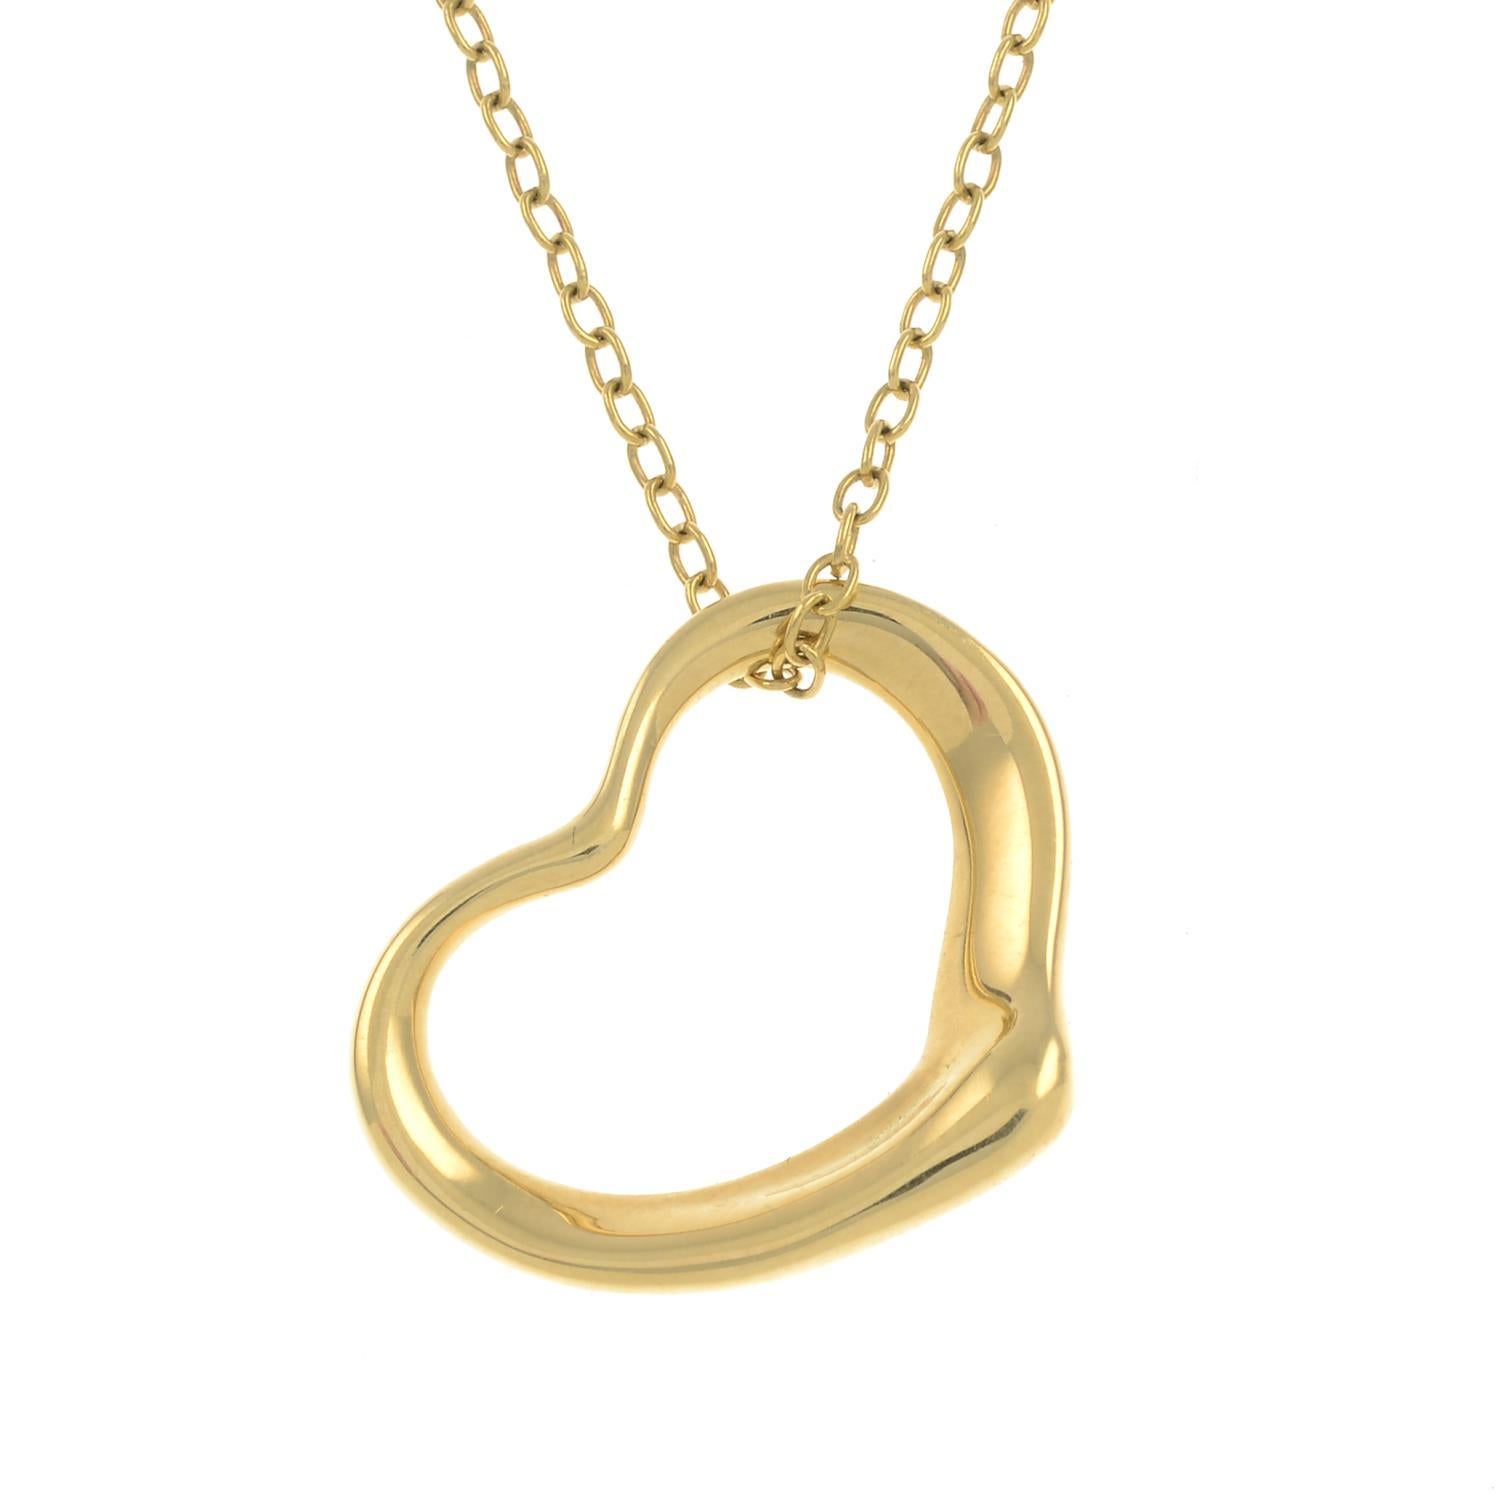 Contemporary Open Heart Pendant with Chain by Elsa Peretti for Tiffany & Co.